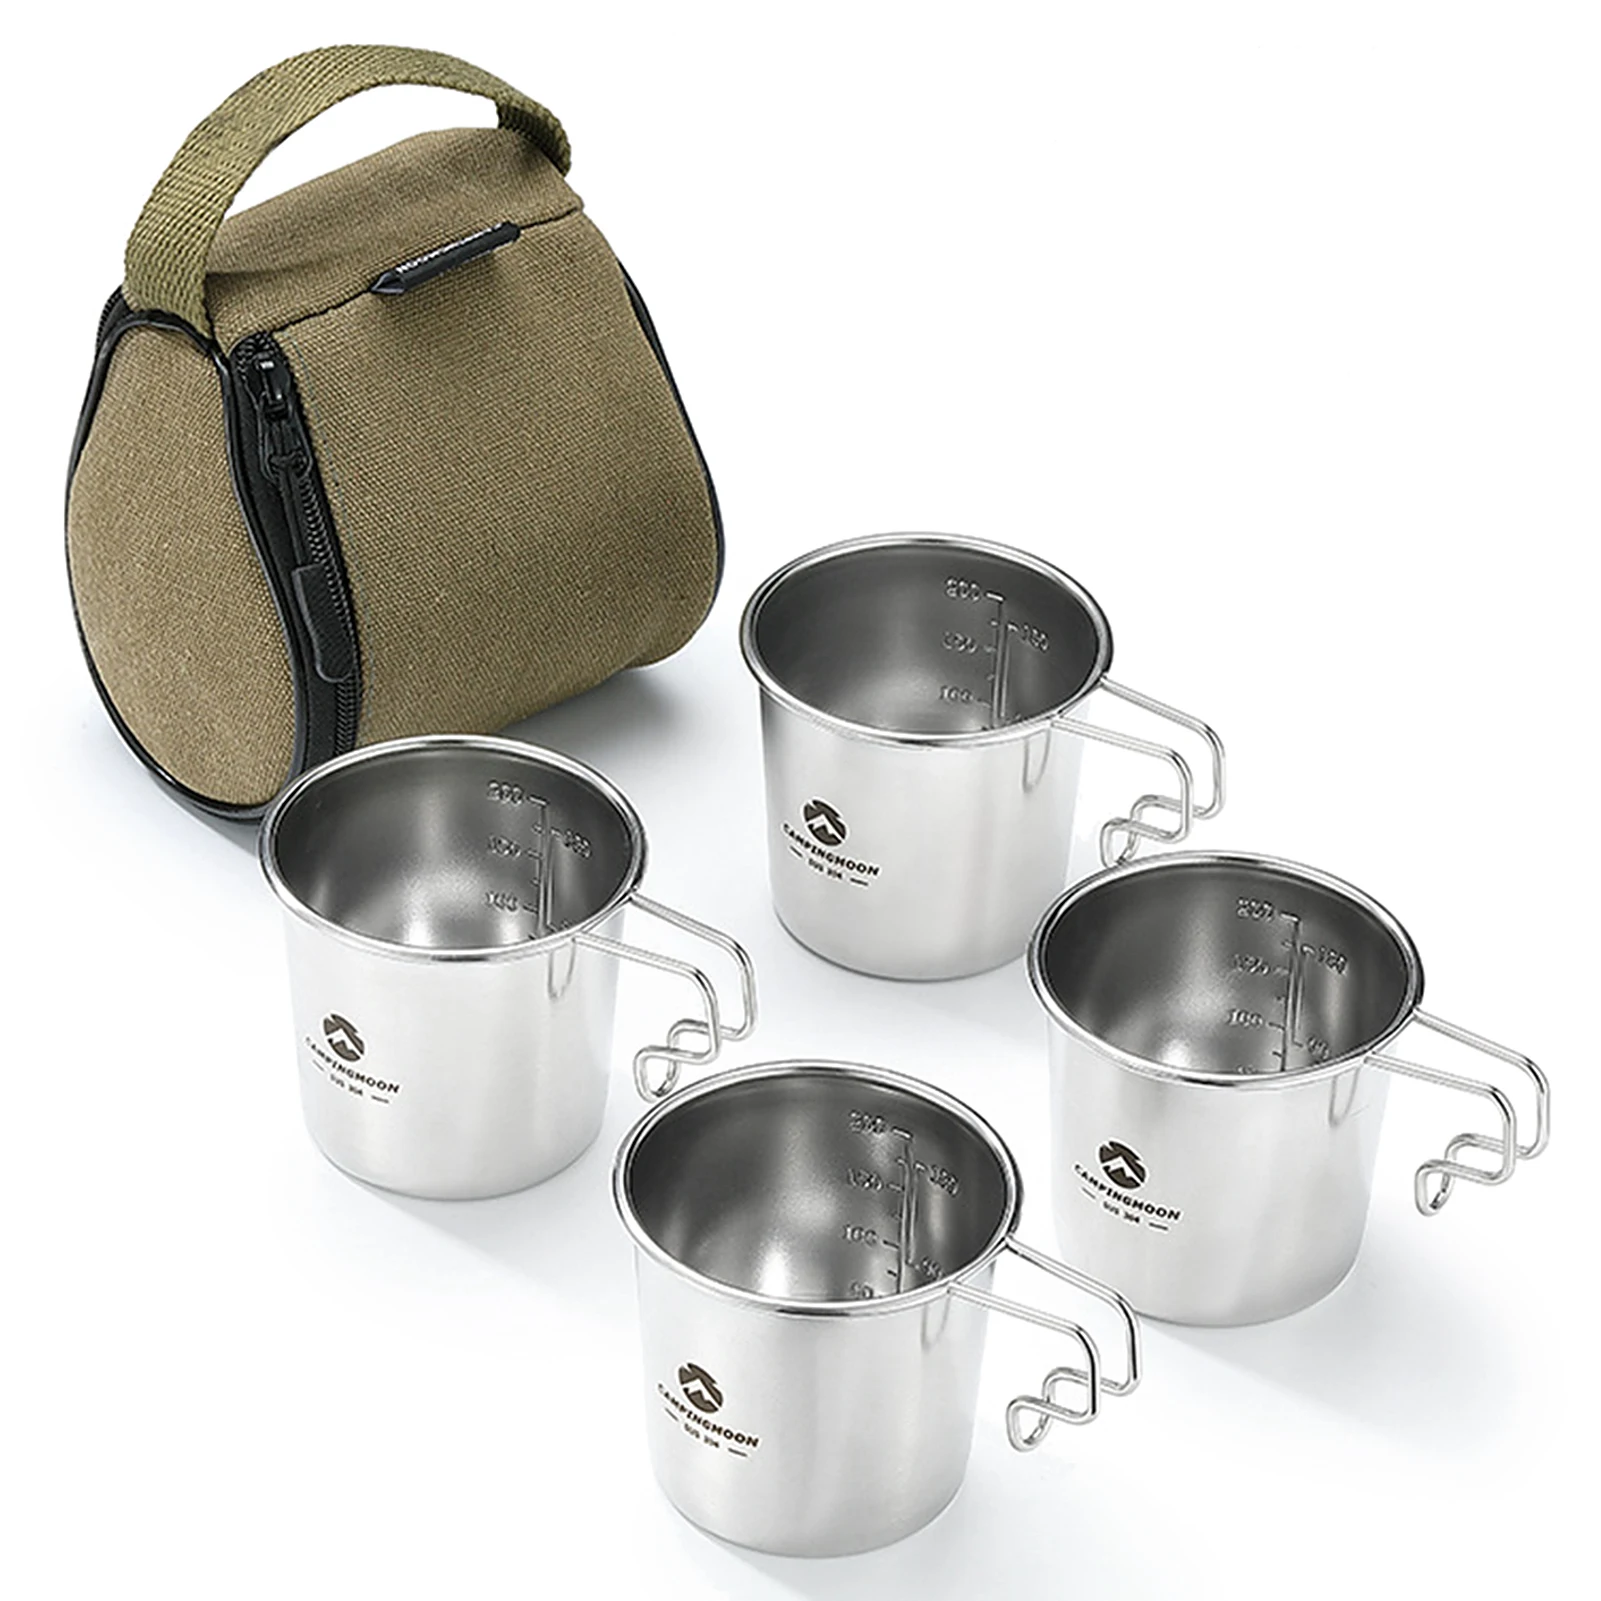 

Four Outdoor Stainless Steel 210ml Sierra Cups with a Storage Bag Picnic Tableware Portable Barbecue Hiking Camping Cup Cookware